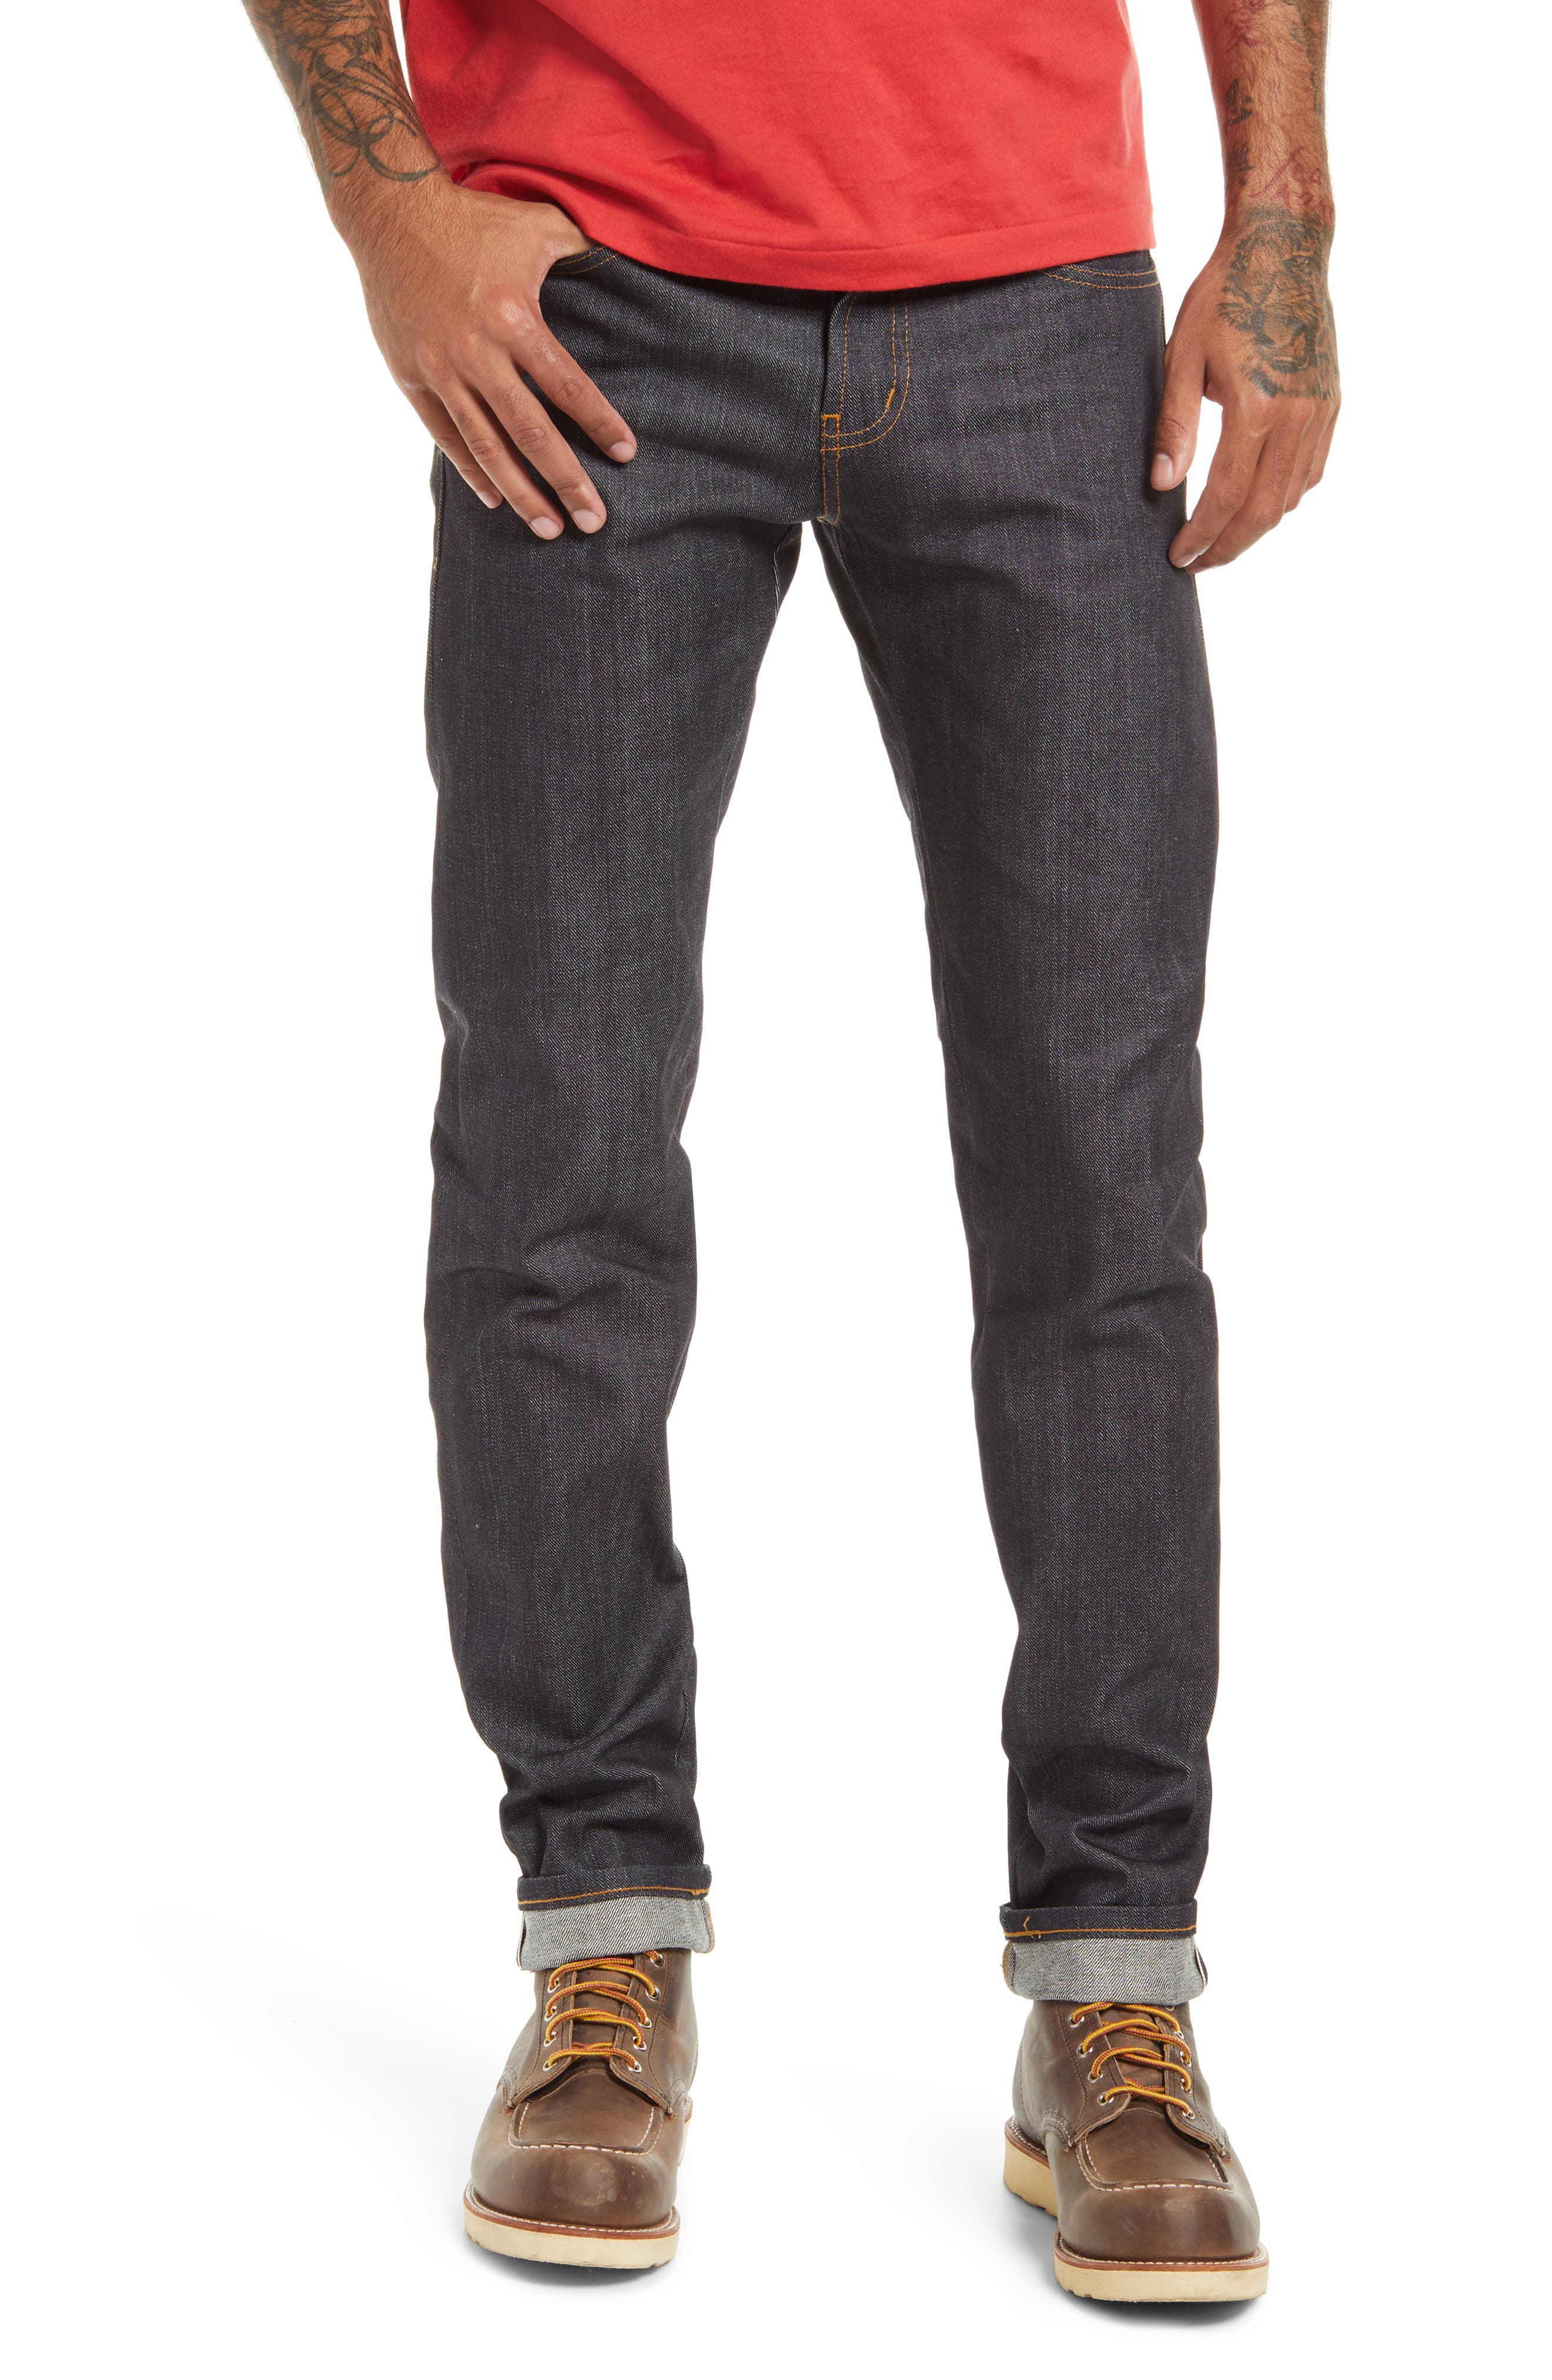 naked and famous denim sale